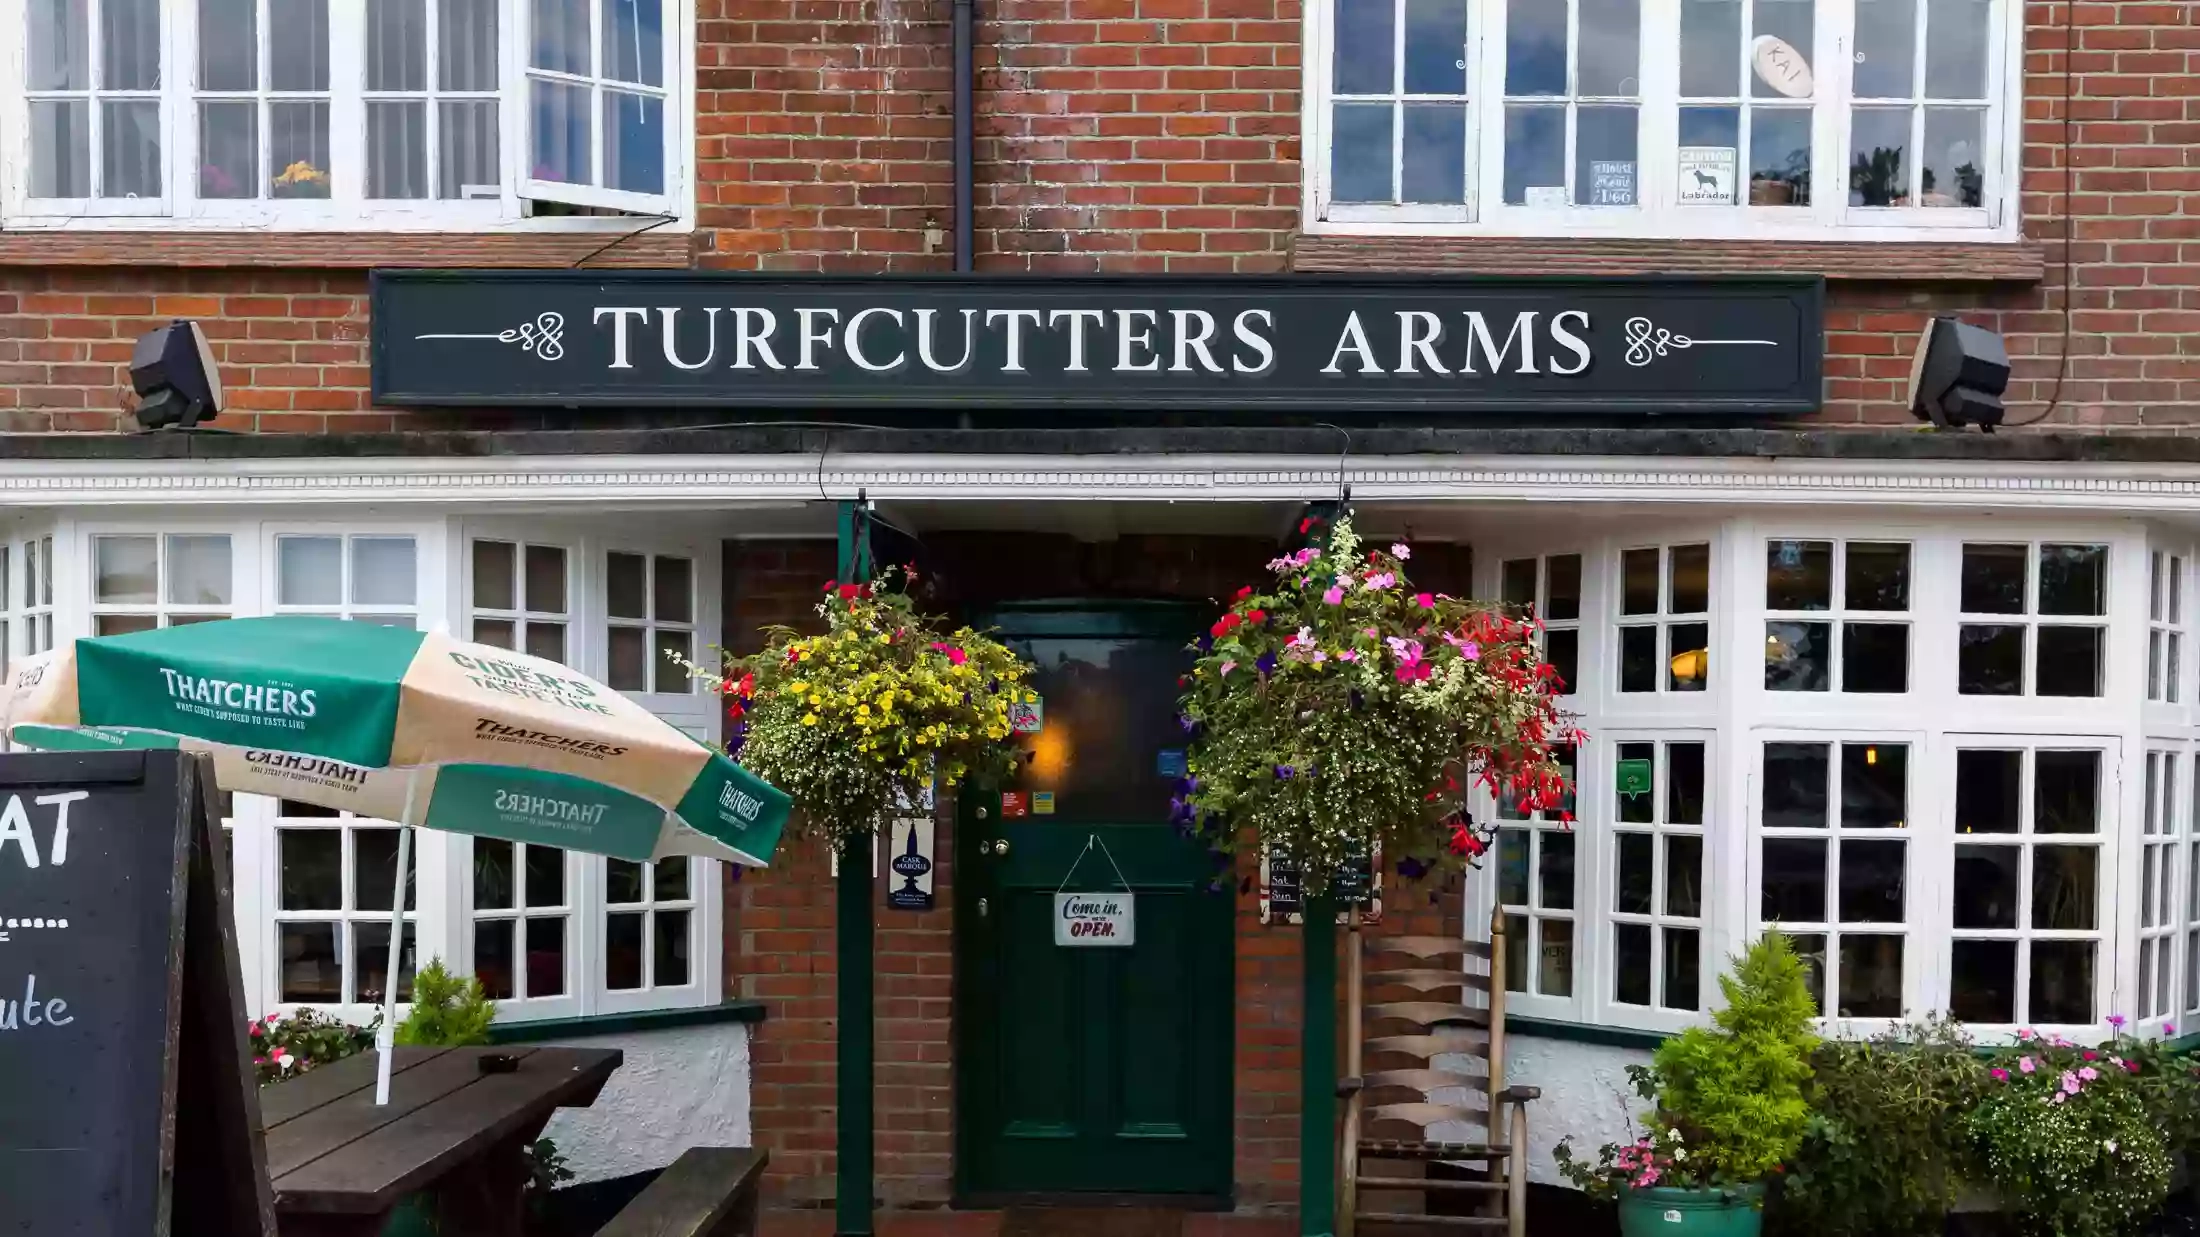 The Turfcutters Arms, East Boldre